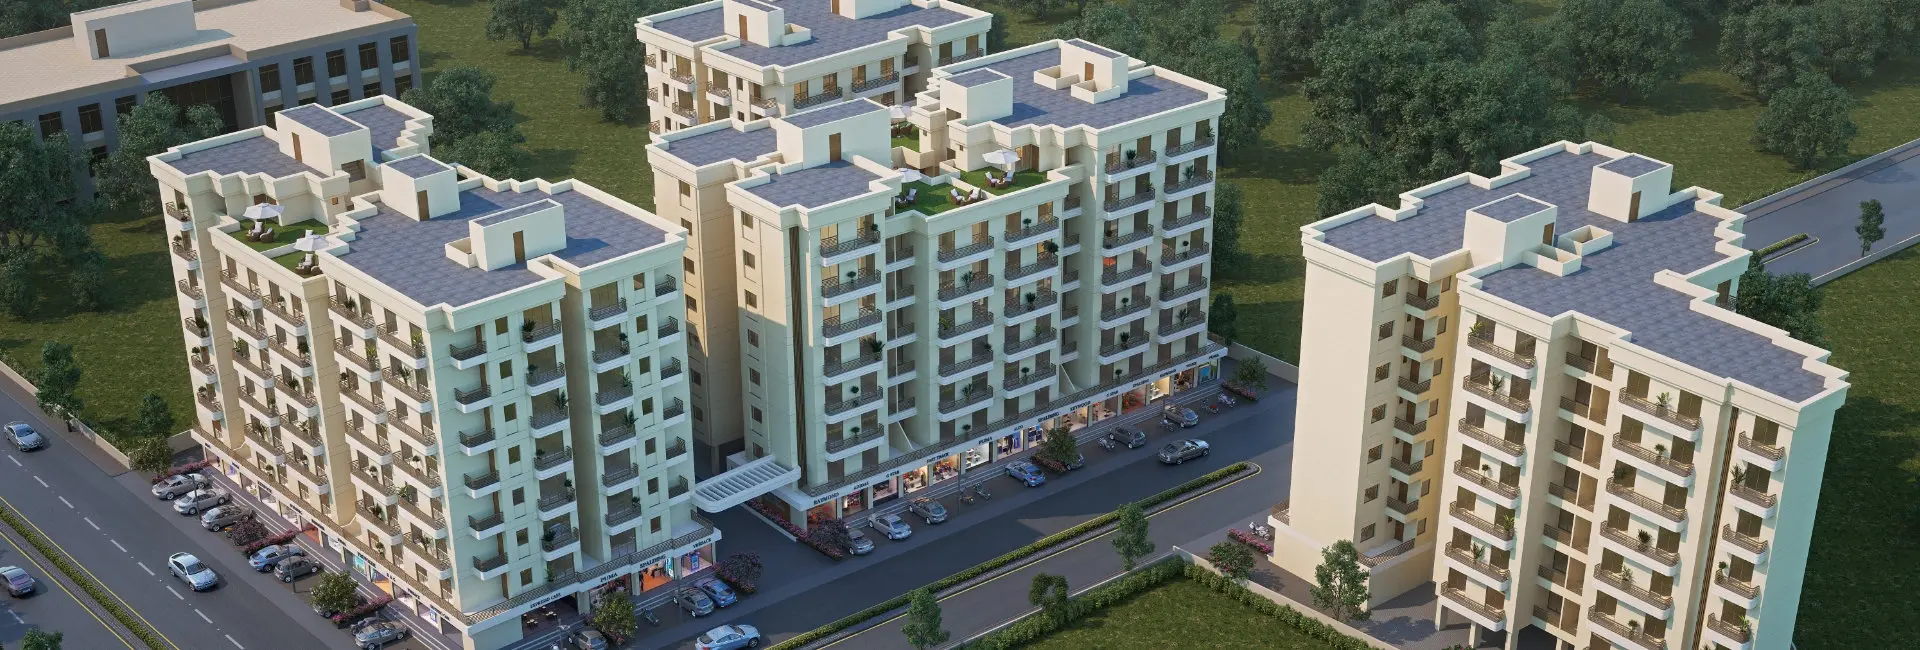 Residential and commercial apartment in vadodara - Shree Siddheshwar Highdeck